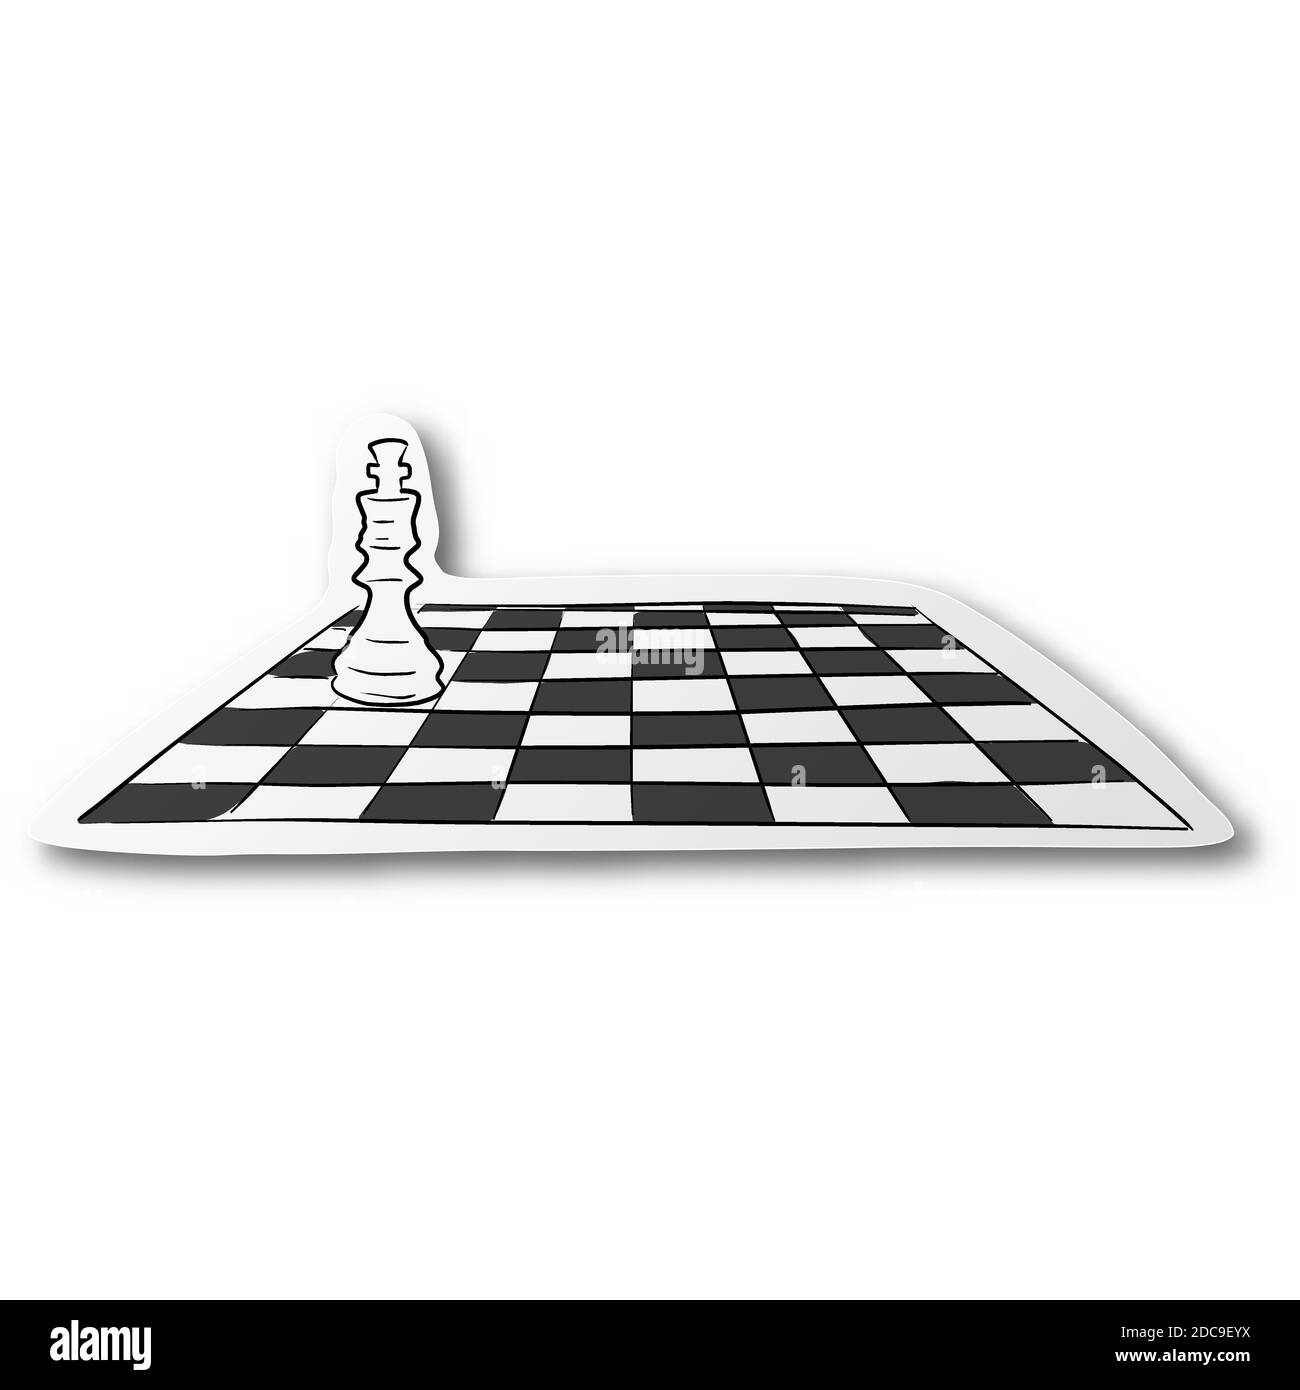 Chess board Stock Vector Images - Alamy